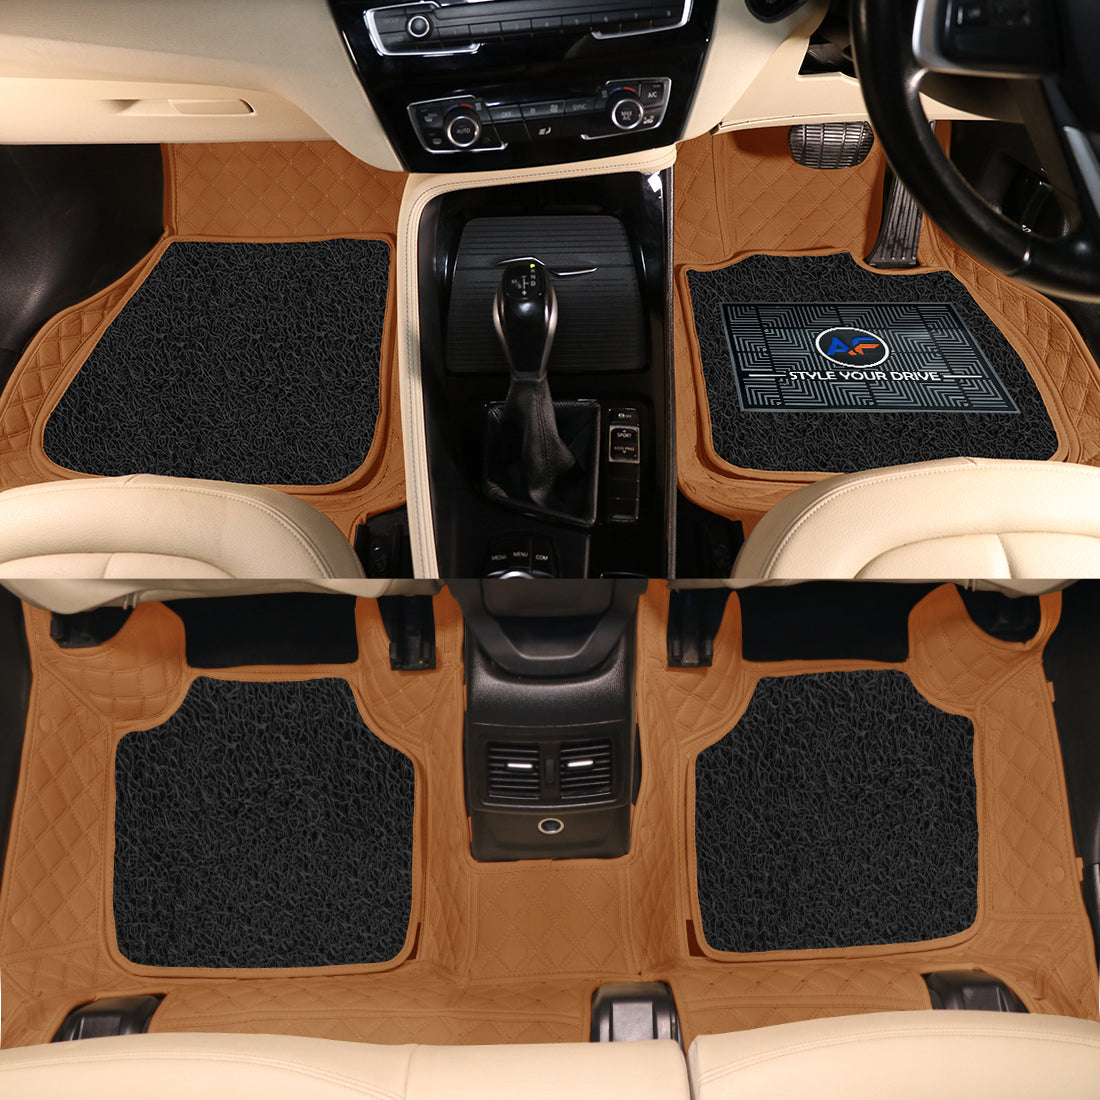 MG Gloster (7 Seater) 2020 7D Luxury Car Mat, All Weather Proof, Anti-Skid, 100% Waterproof & Odorless with Unique Diamond Fish Design (24mm Luxury PU Leather, 2 Rows)